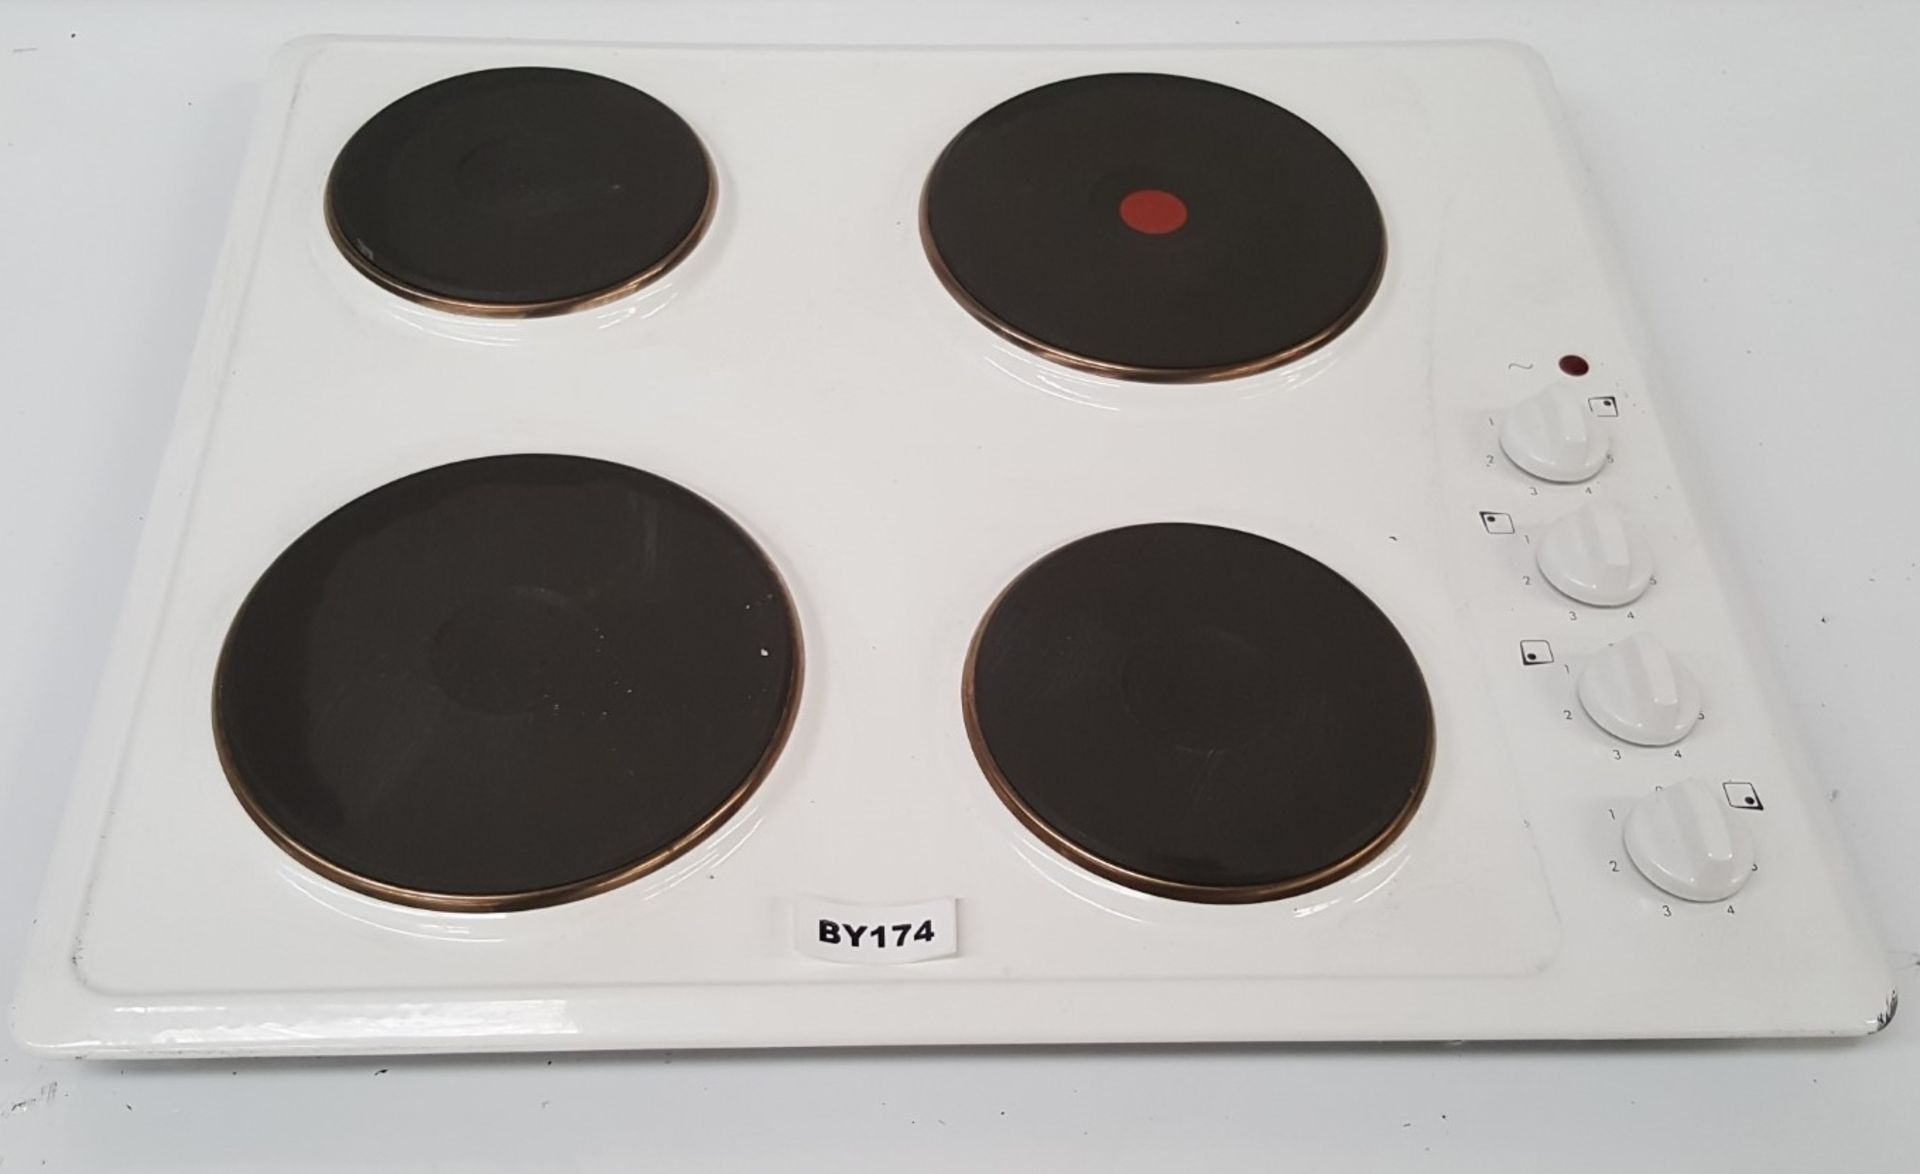 1 x Ignis AKL7000/WH 60 cm Electric Hob White Finish - Ref BY174